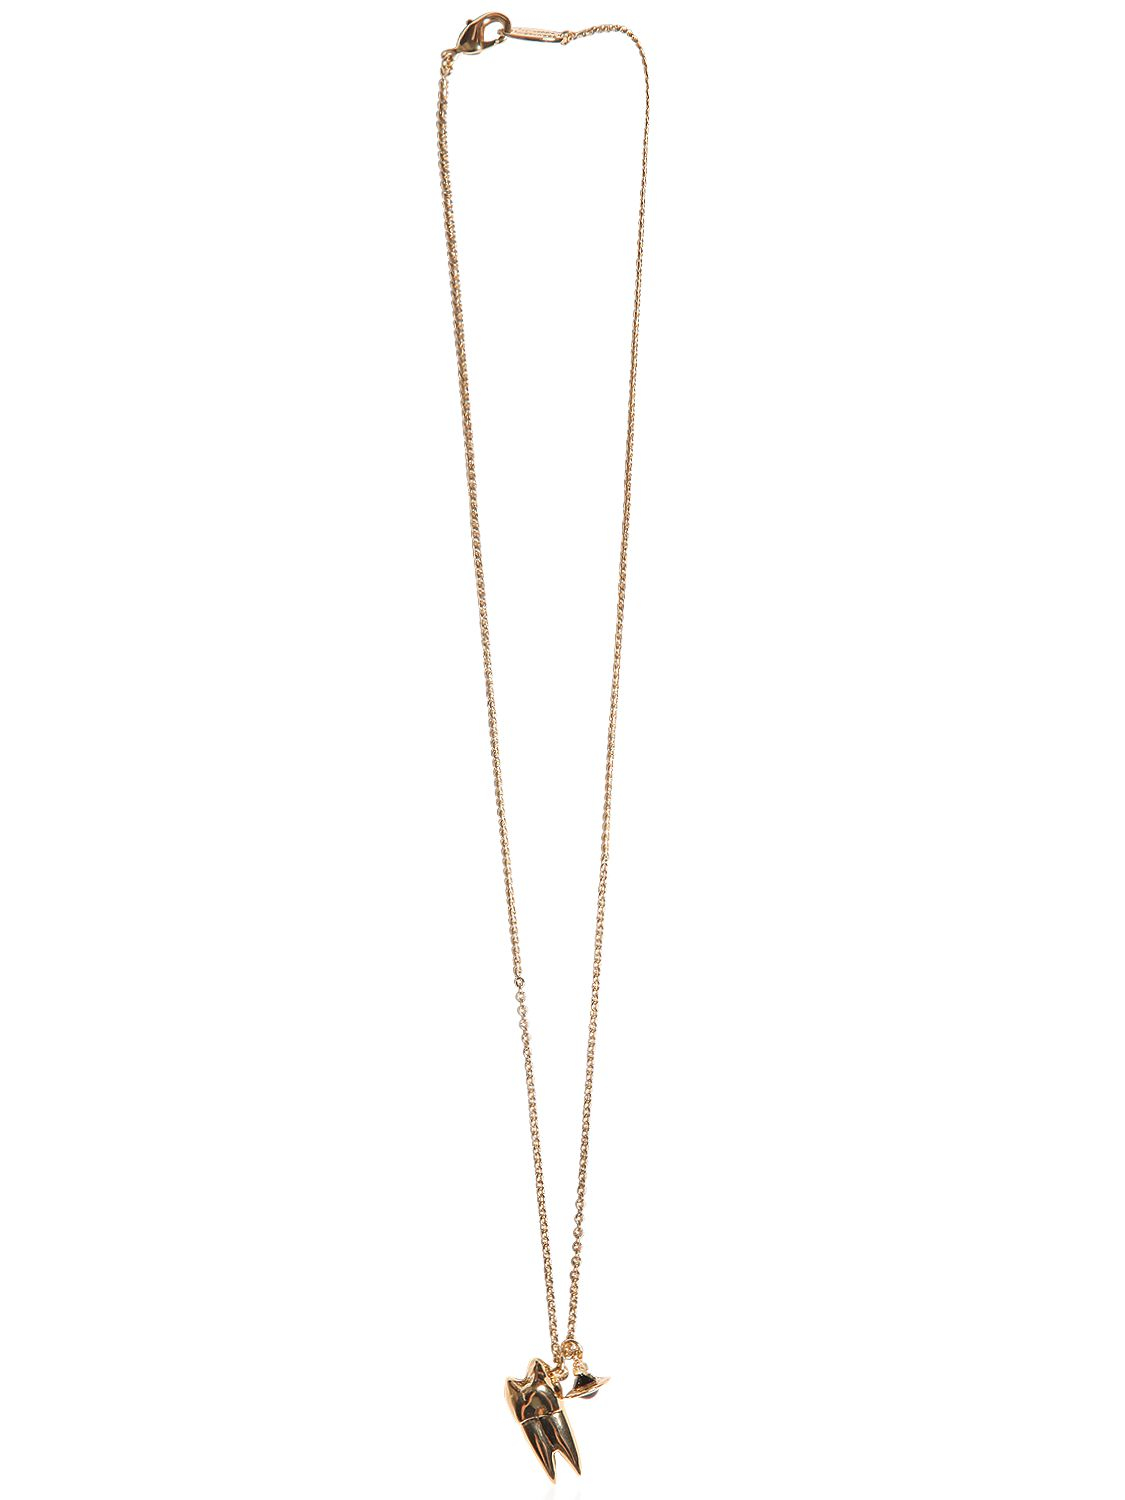 Lyst - Vivienne Westwood Tooth & Orb Pendants On Chain Necklace in Metallic